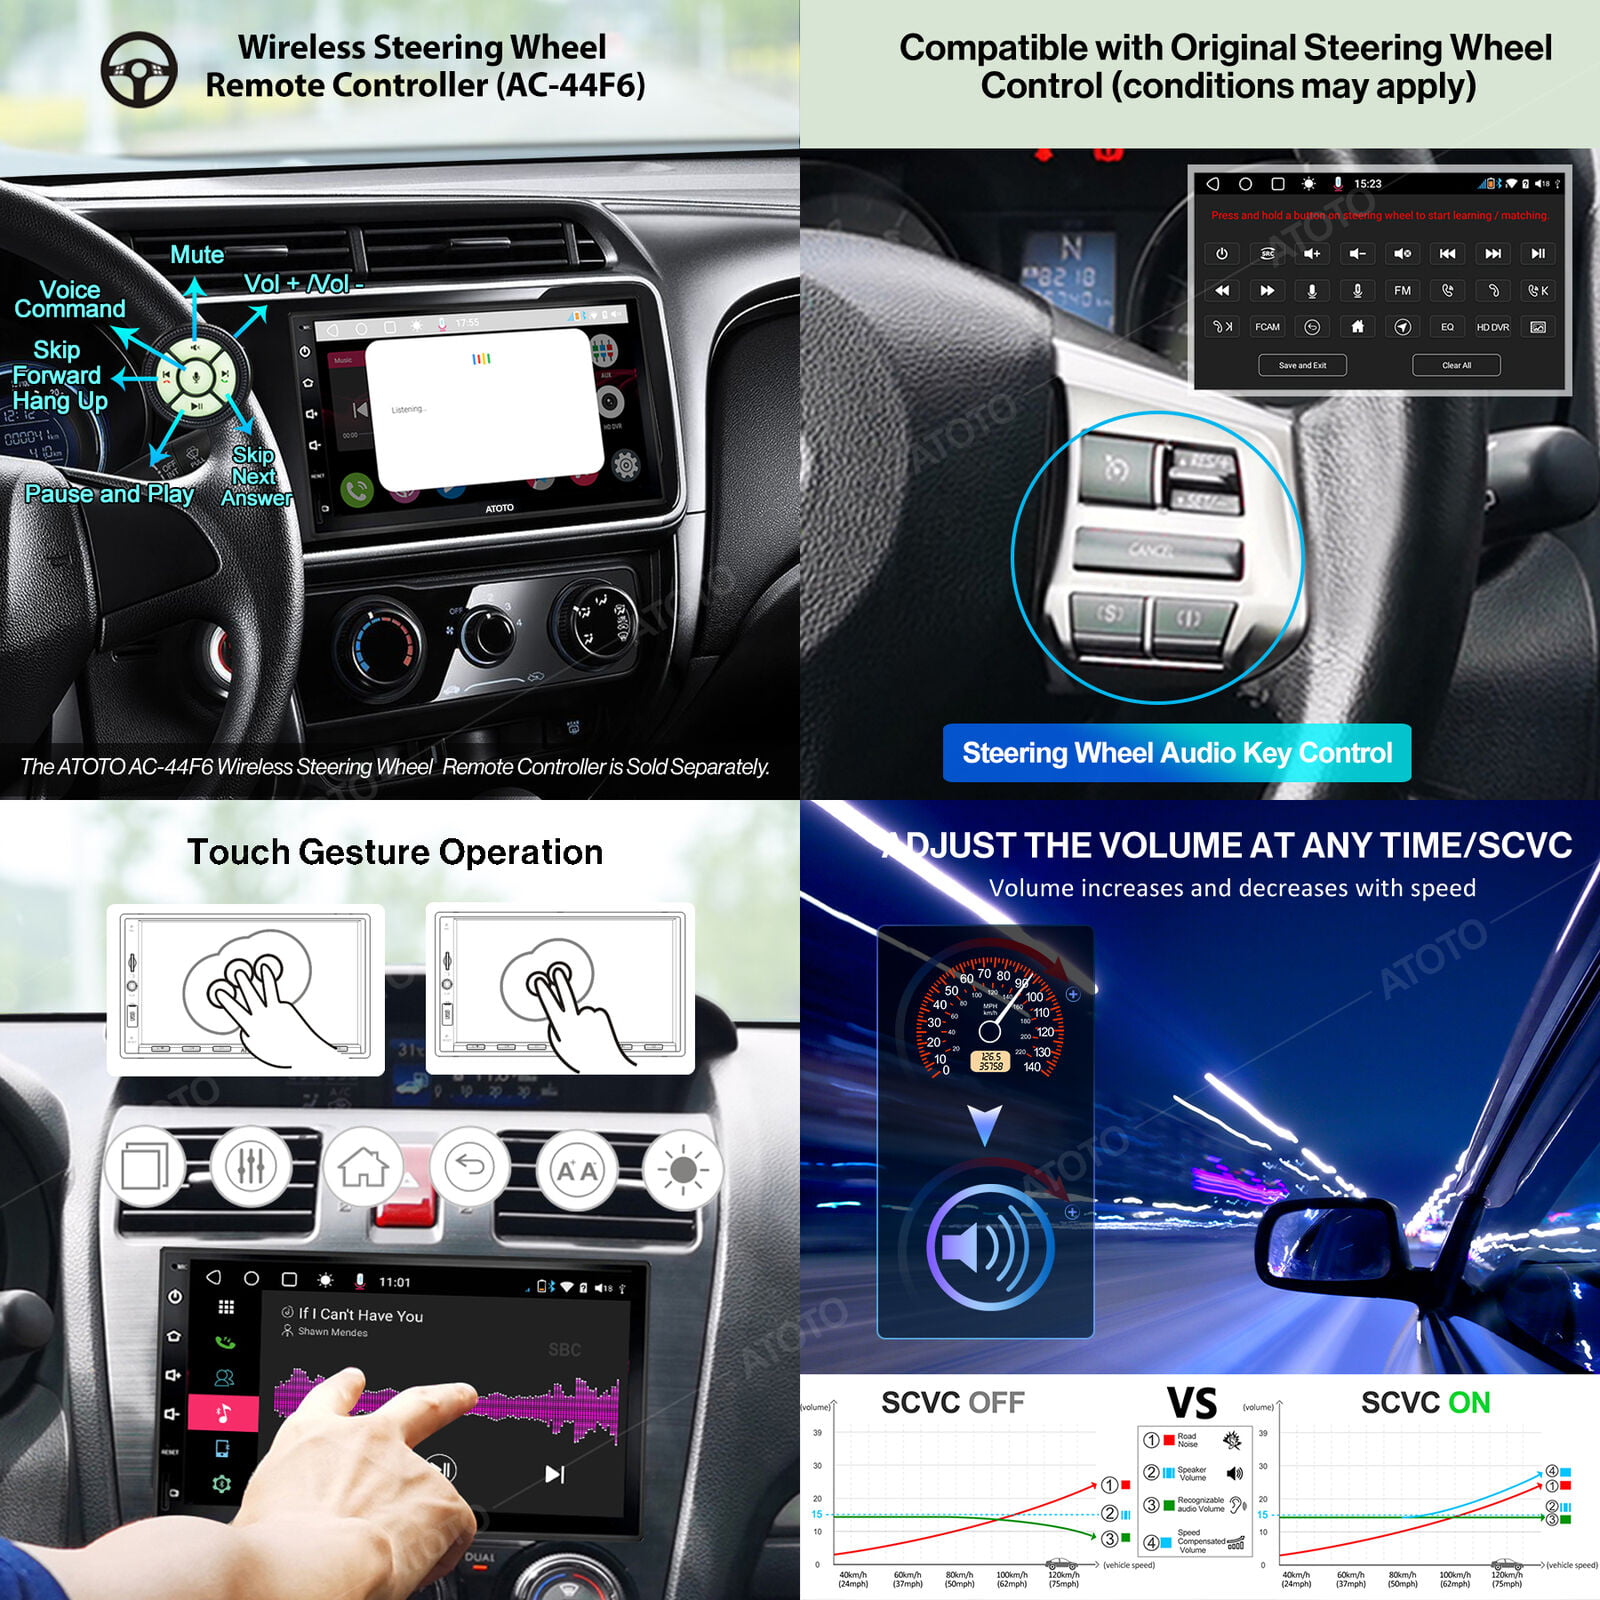 ATOTO Car Radio S8 Premium 2 Din Full Touch Screen Car Stereo Support IOS  Android Audio Video Multimedia Players Dual Bluetooth